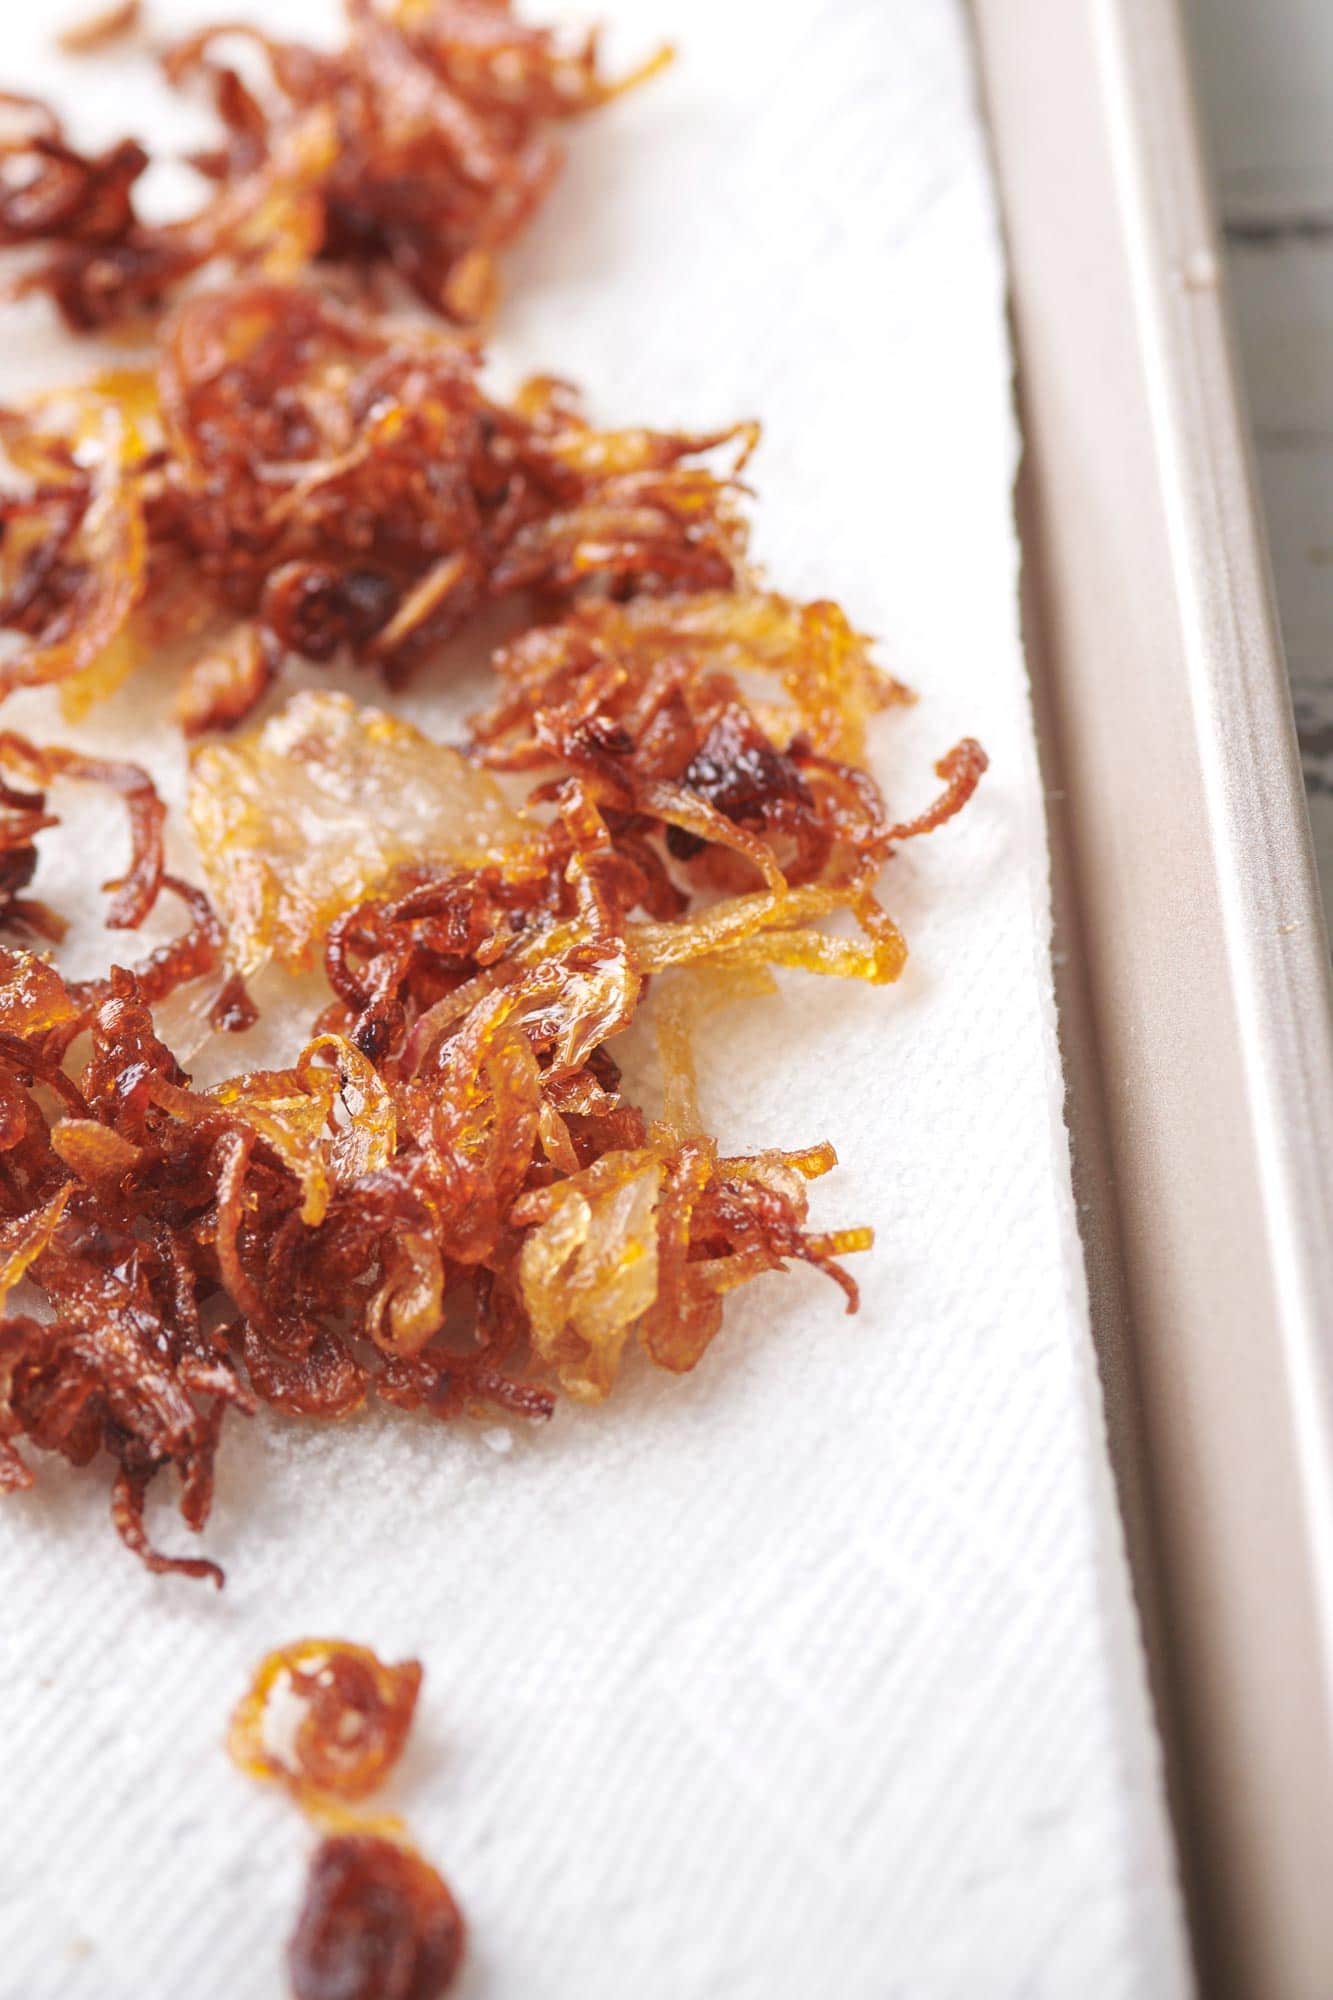 Pile of crispy shallots on paper towel-lined baking sheet.